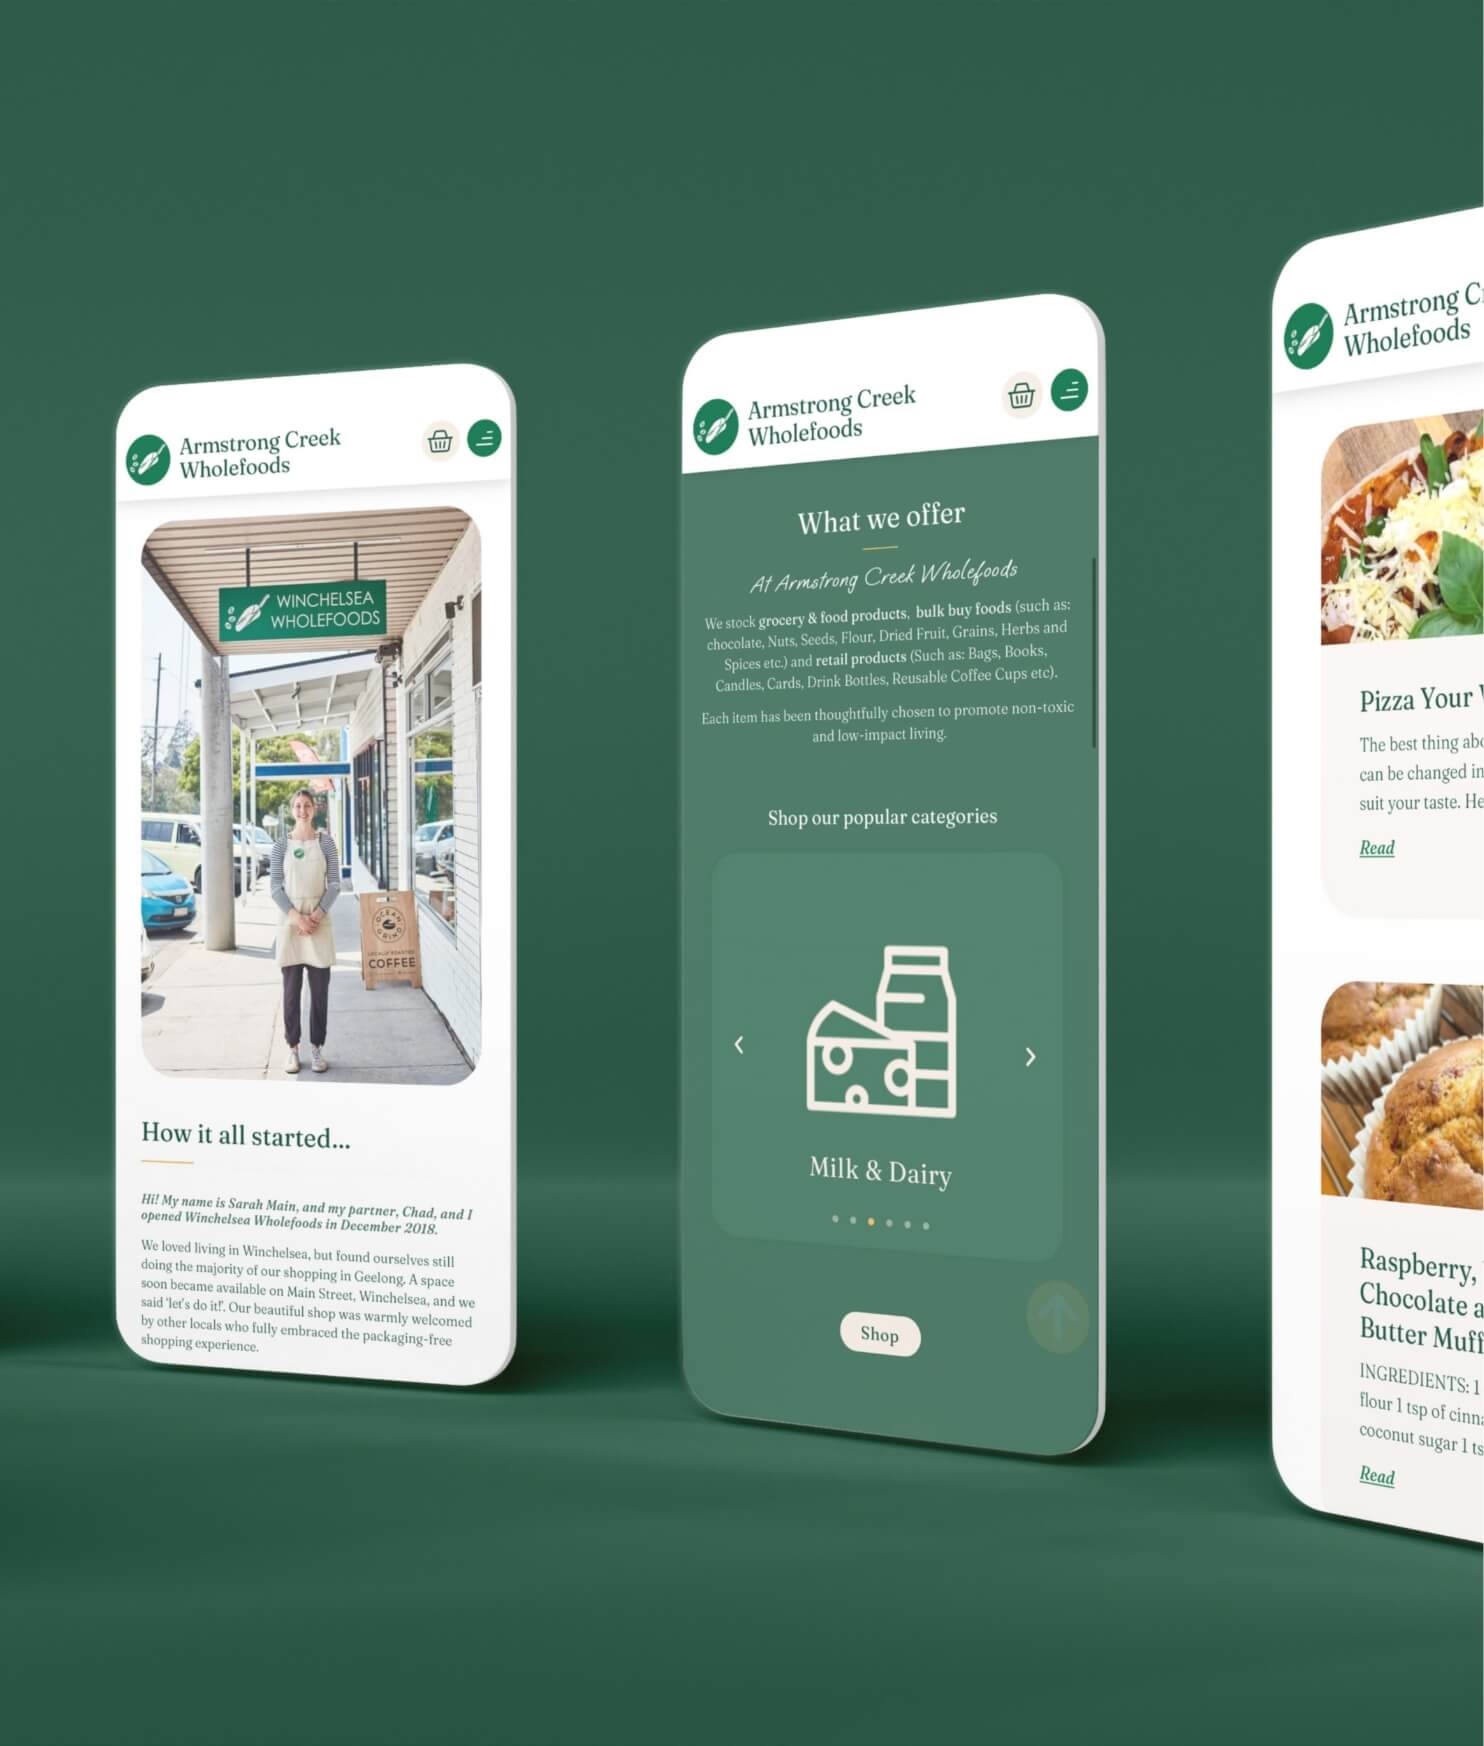 Armstrong Creek Wholefoods website shown over 3 mobile phone shaped cutouts